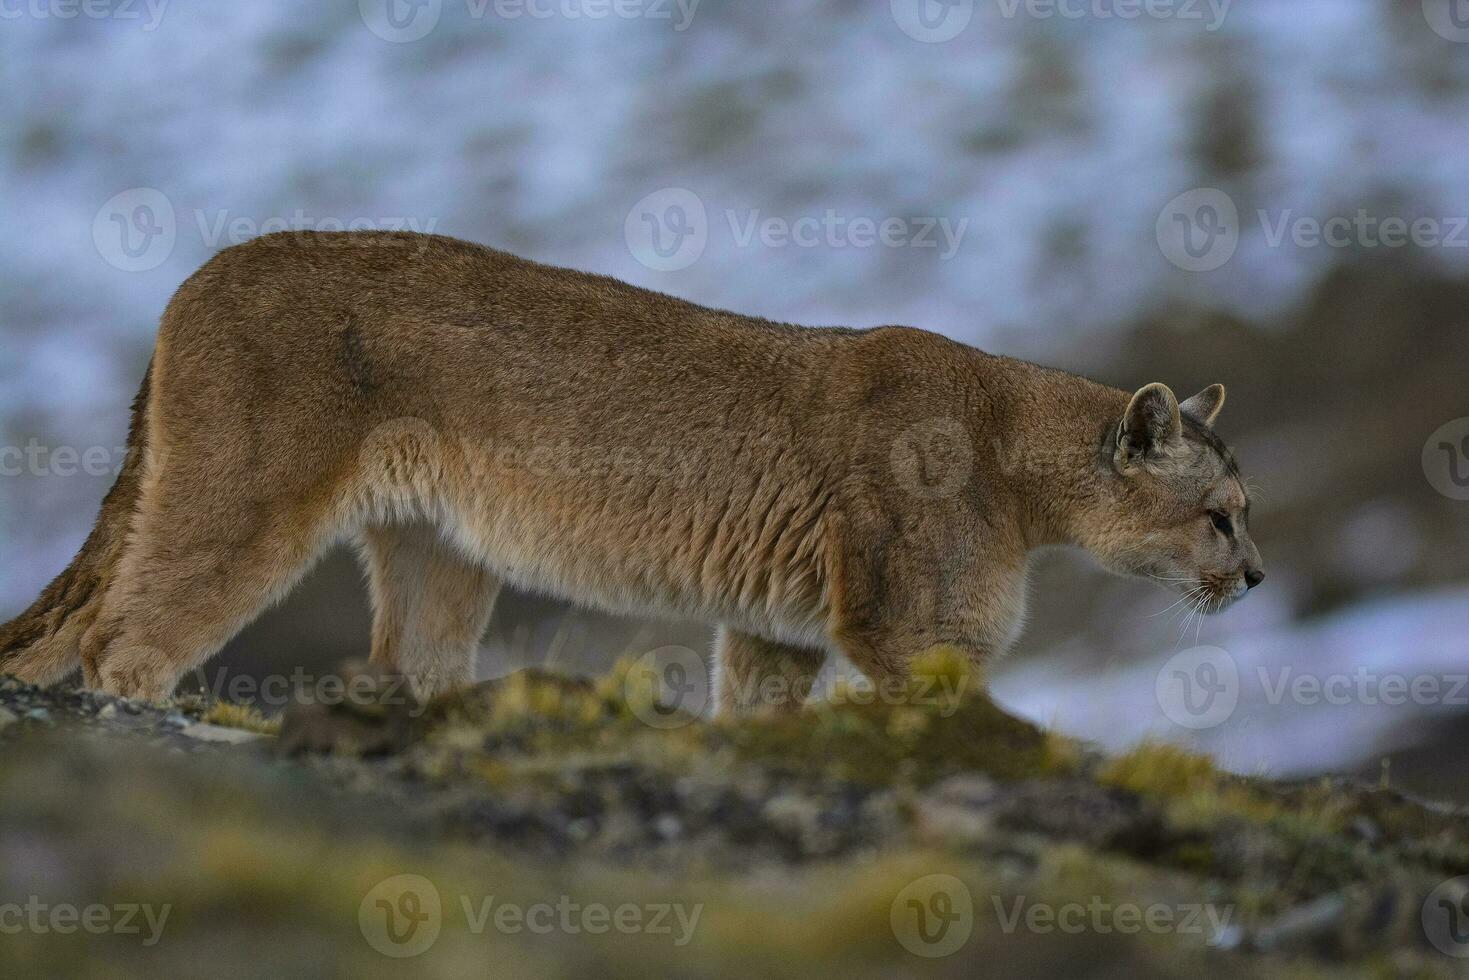 Puma walking in mountain environment, Torres del Paine National Park, Patagonia, Chile. photo